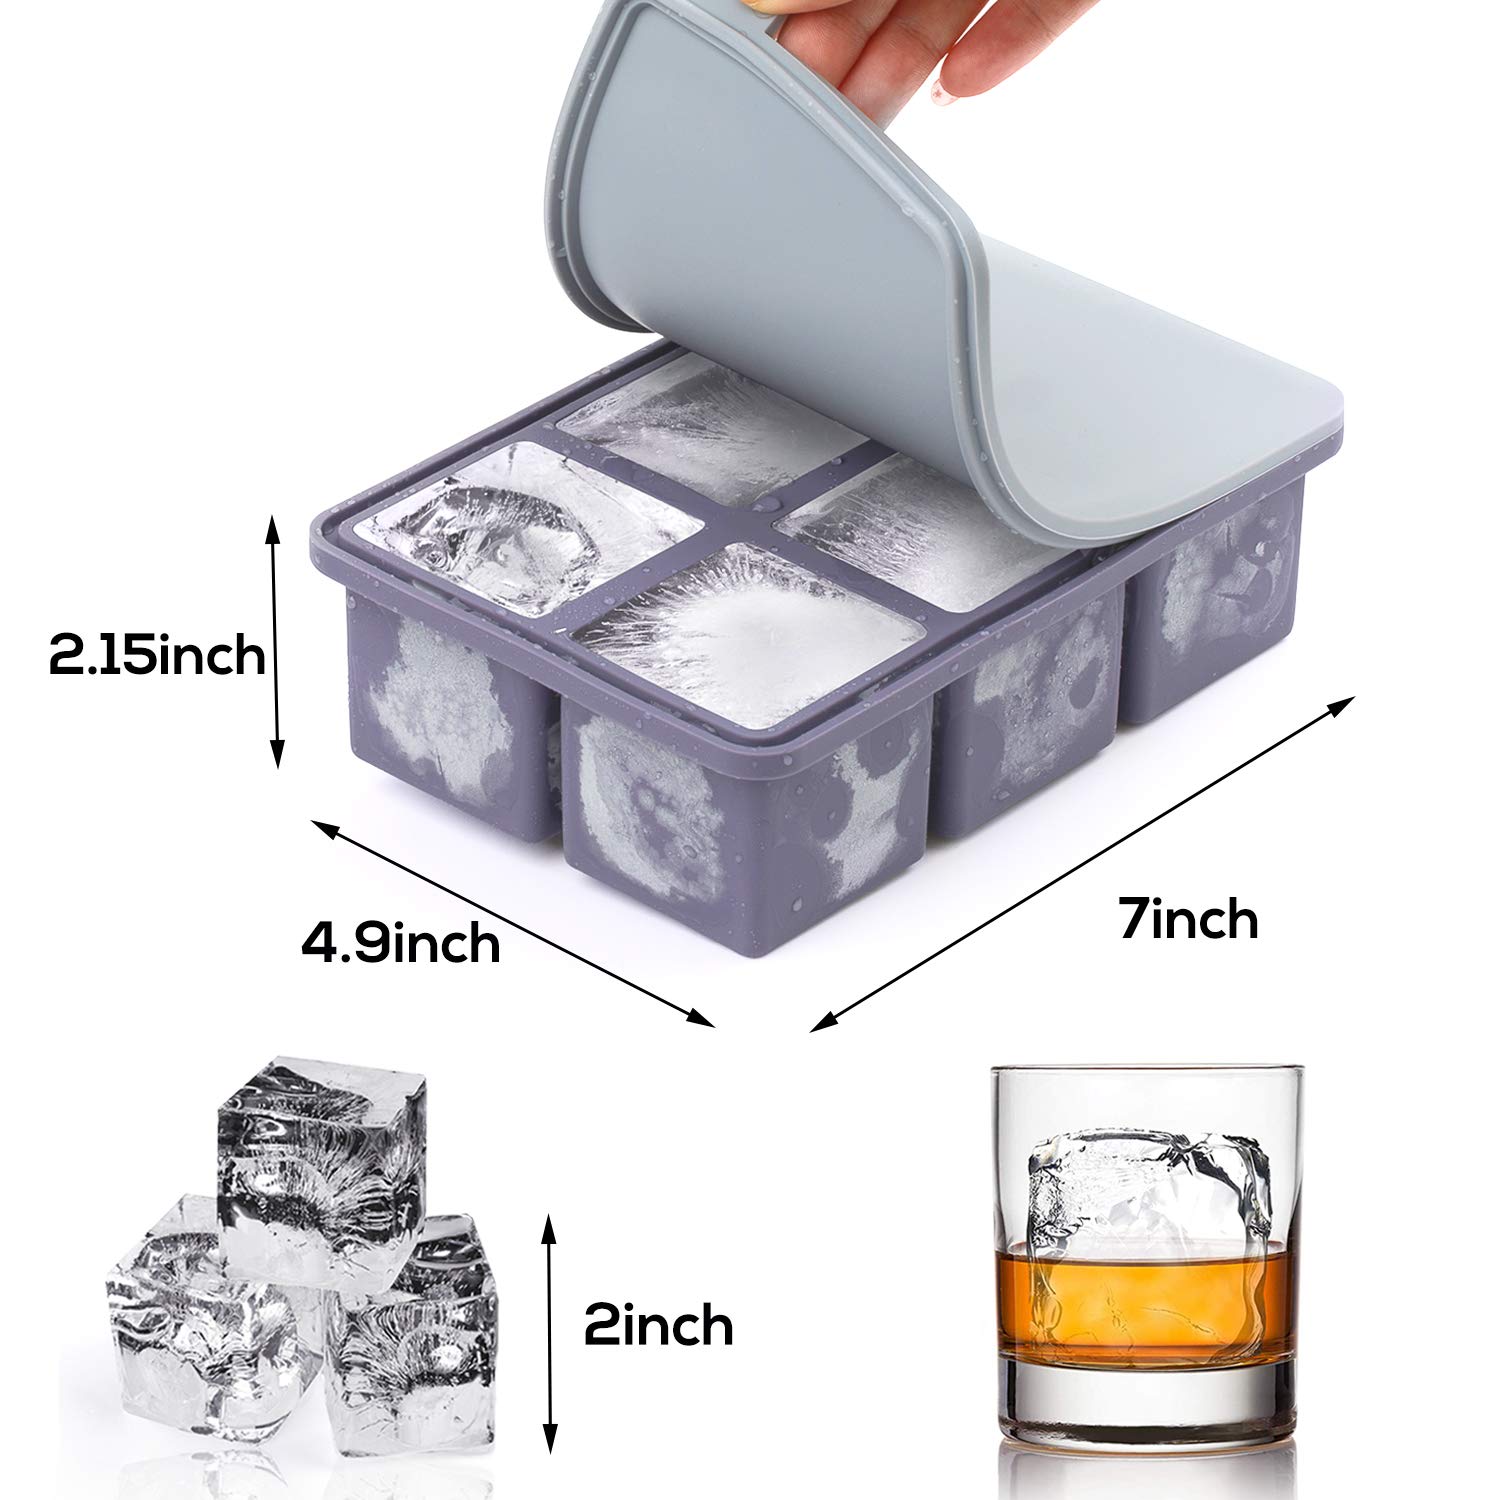 Large Square Ice Cube Tray with lid, Big Block Ice Cube 2 Inch, Giant Cocktail Silicone Ice Maker, Scotch Whiskey Ice Cube, Easy Release Reusable Ice Cubes for Soup Freezer Wine Juice